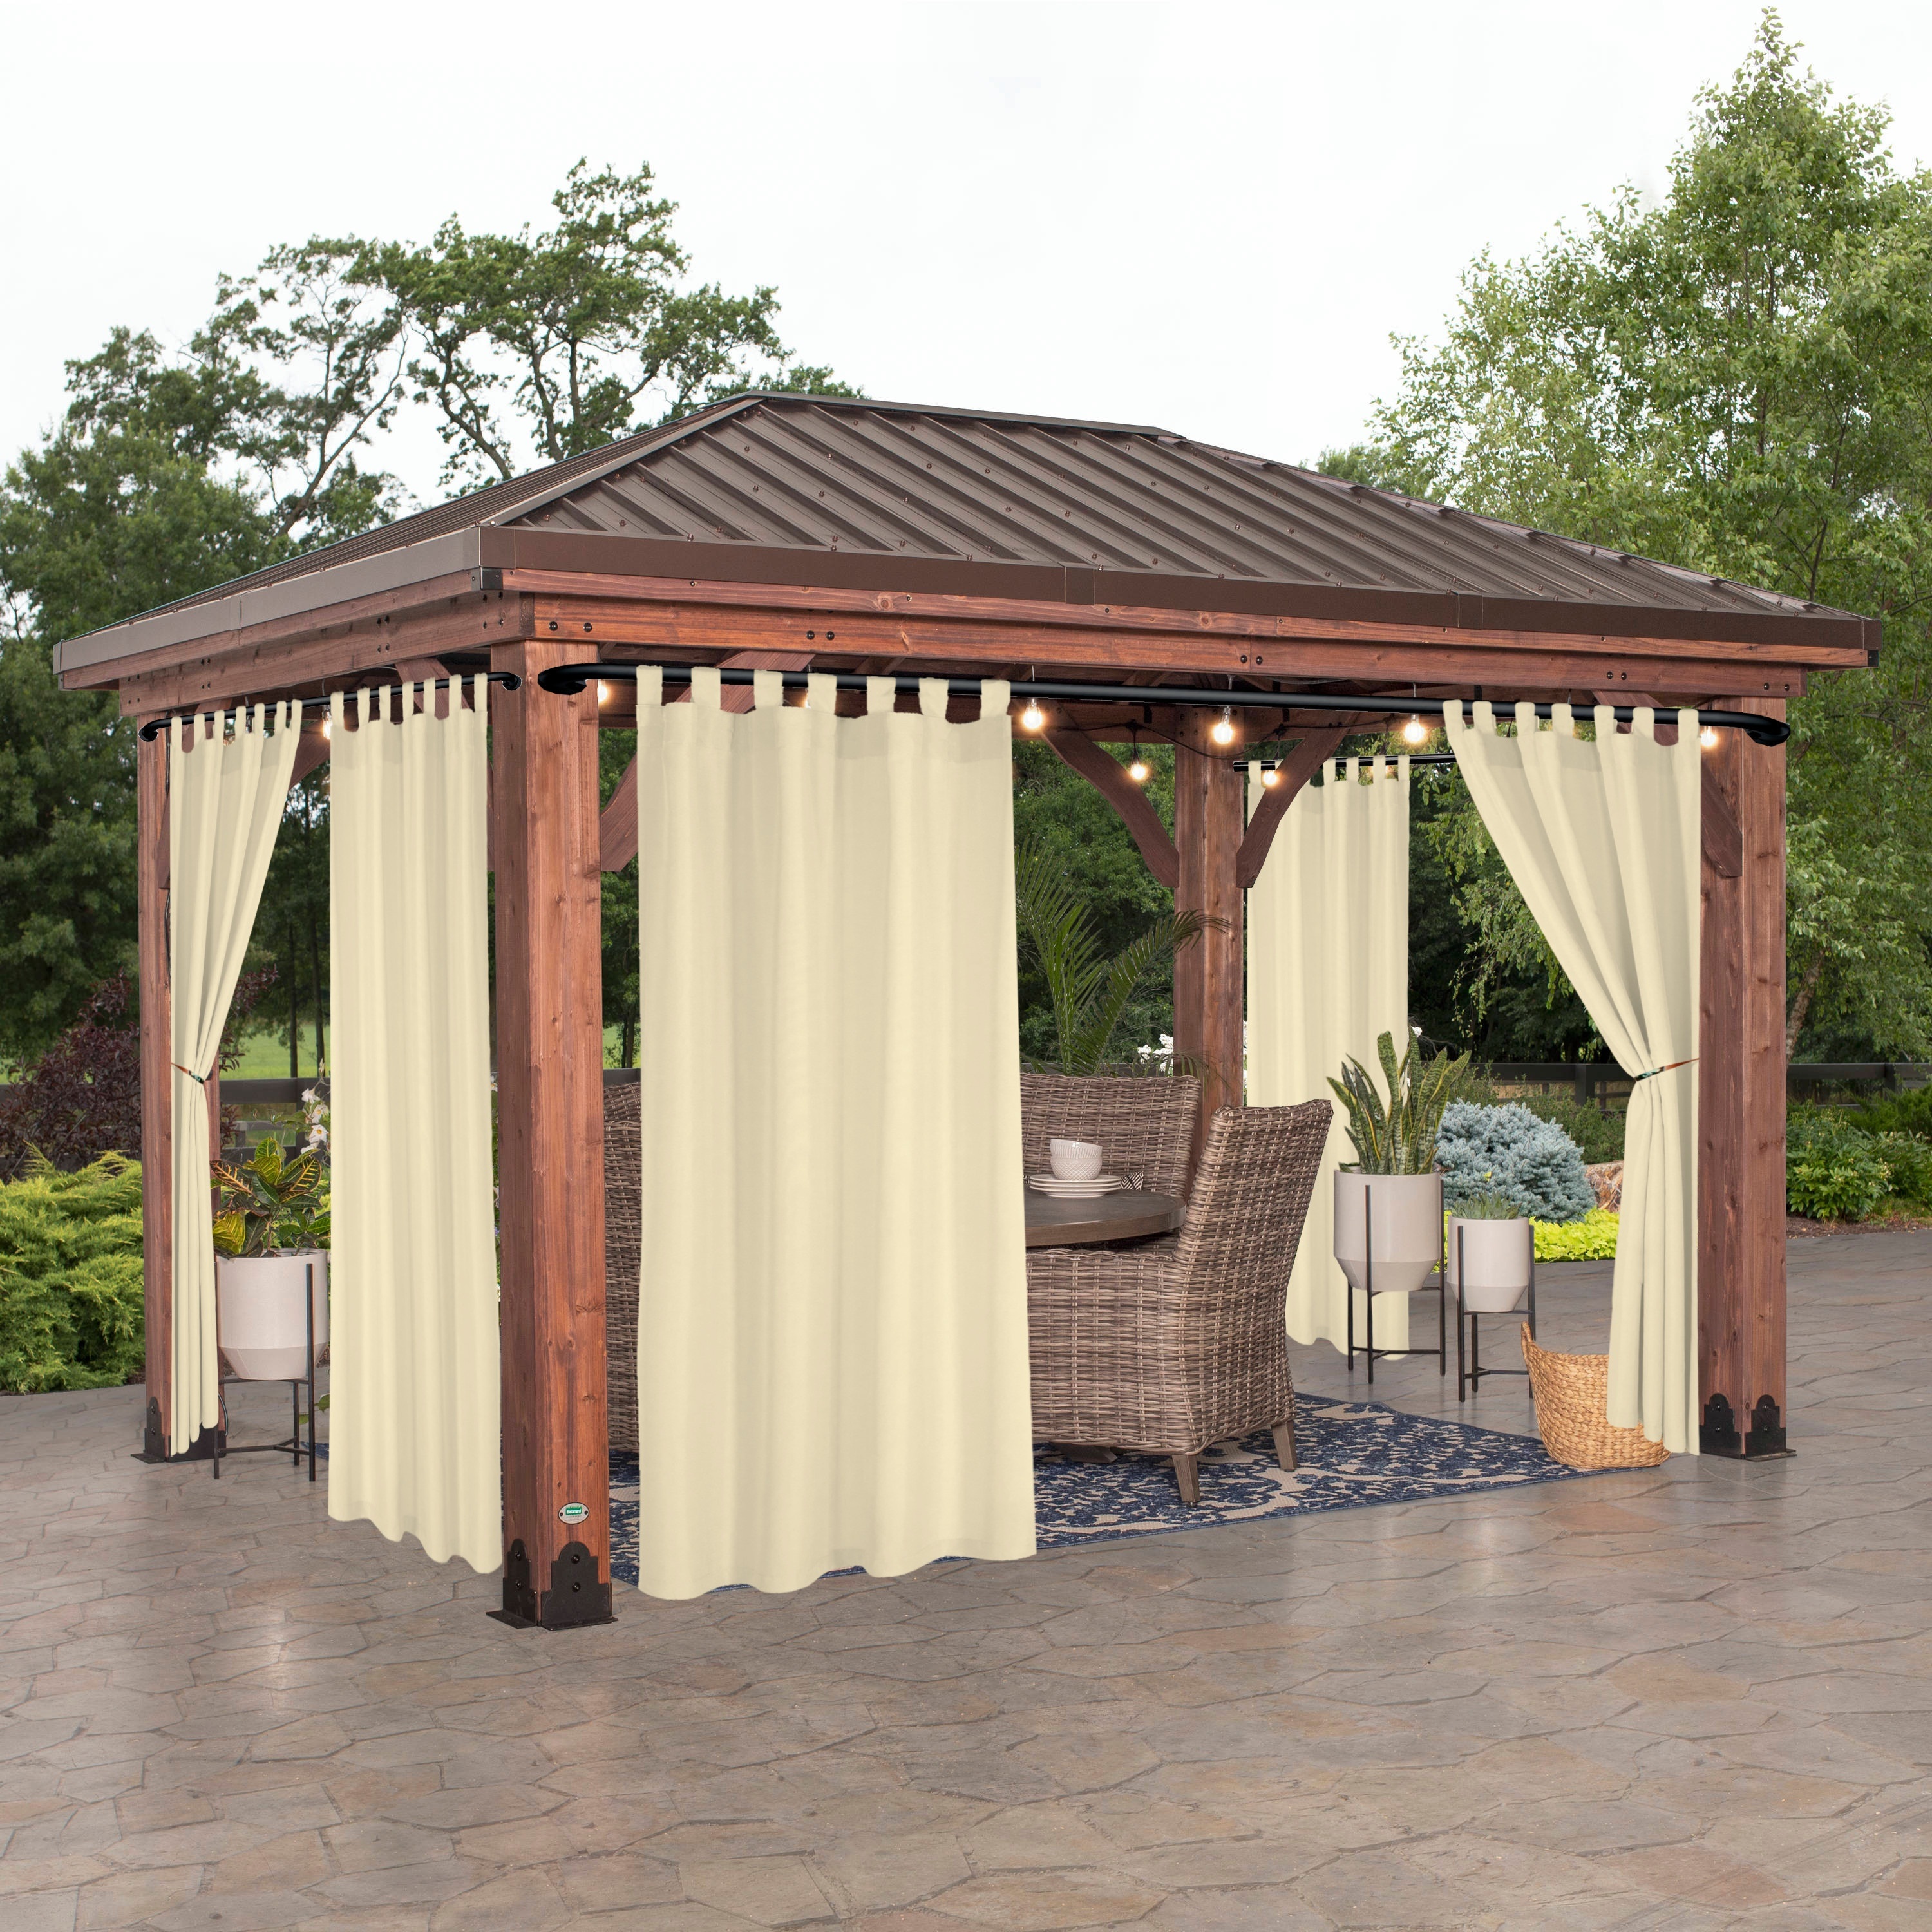 

1pc Waterproof Outdoor Curtain For Patio, Weatherproof Tab Top Privacy Curtain For Porch, Pergola, Cabana, Outdoor Decor